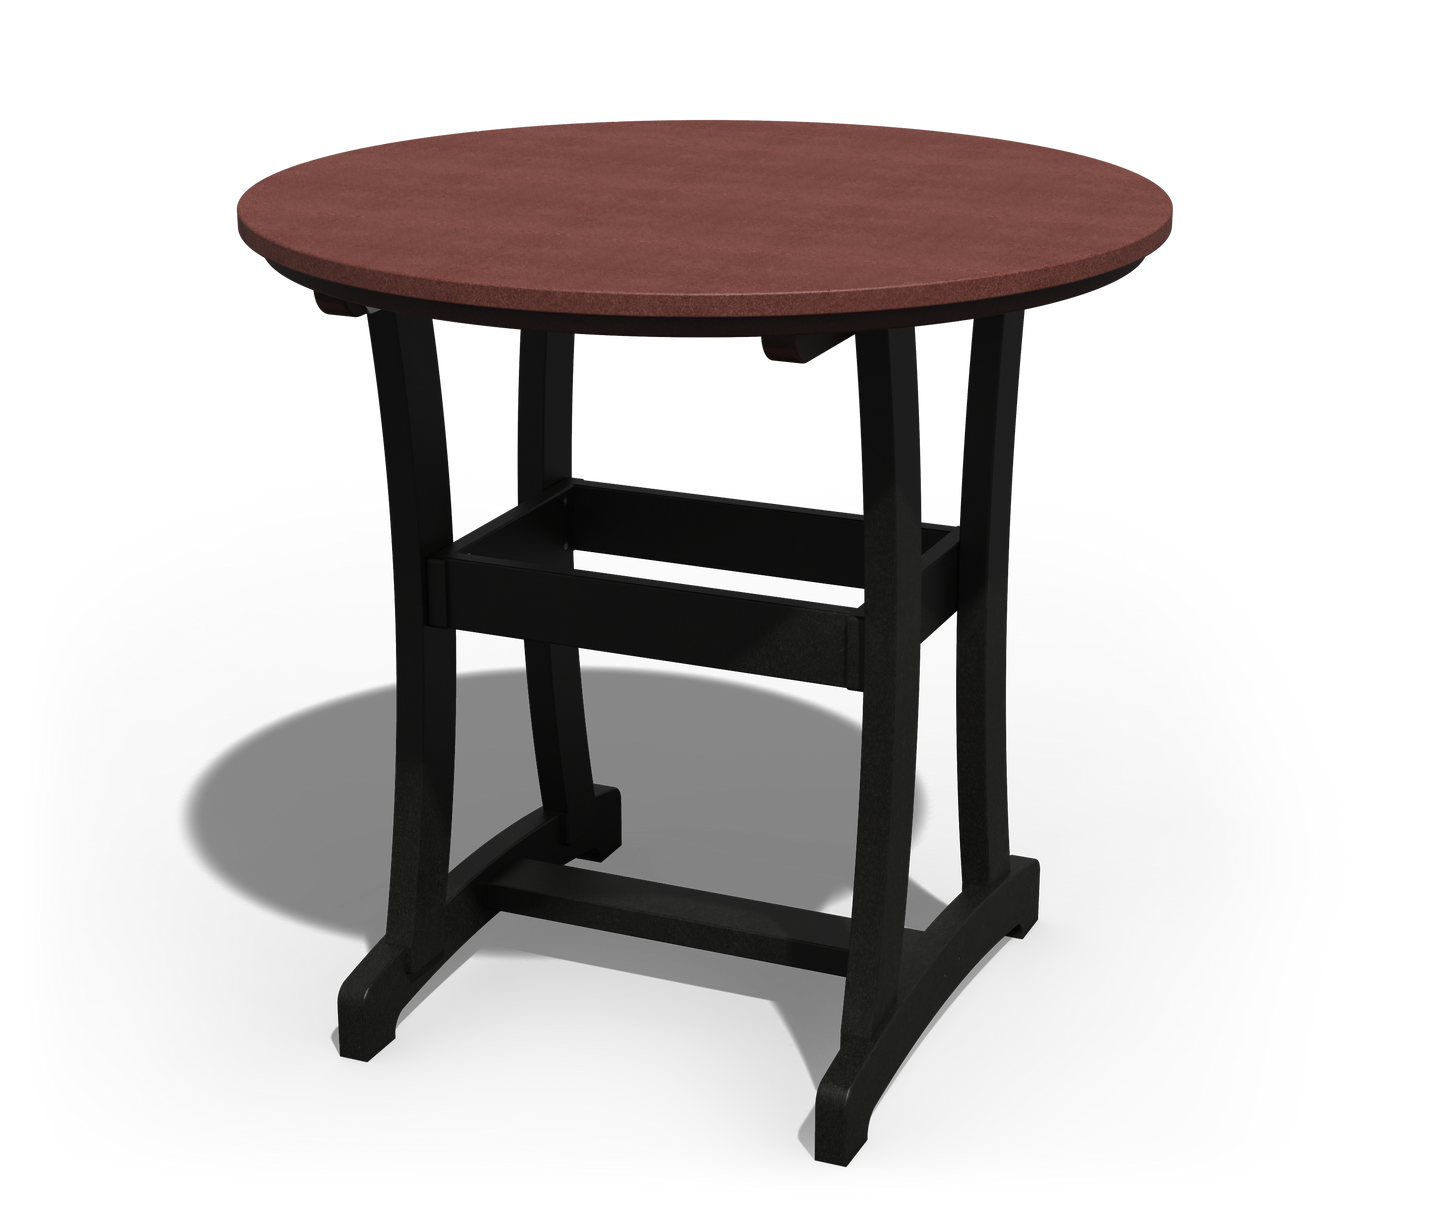 Patiova Recycled Plastic 42" Round Legacy Bar Table - LEAD TIME TO SHIP 4 WEEKS